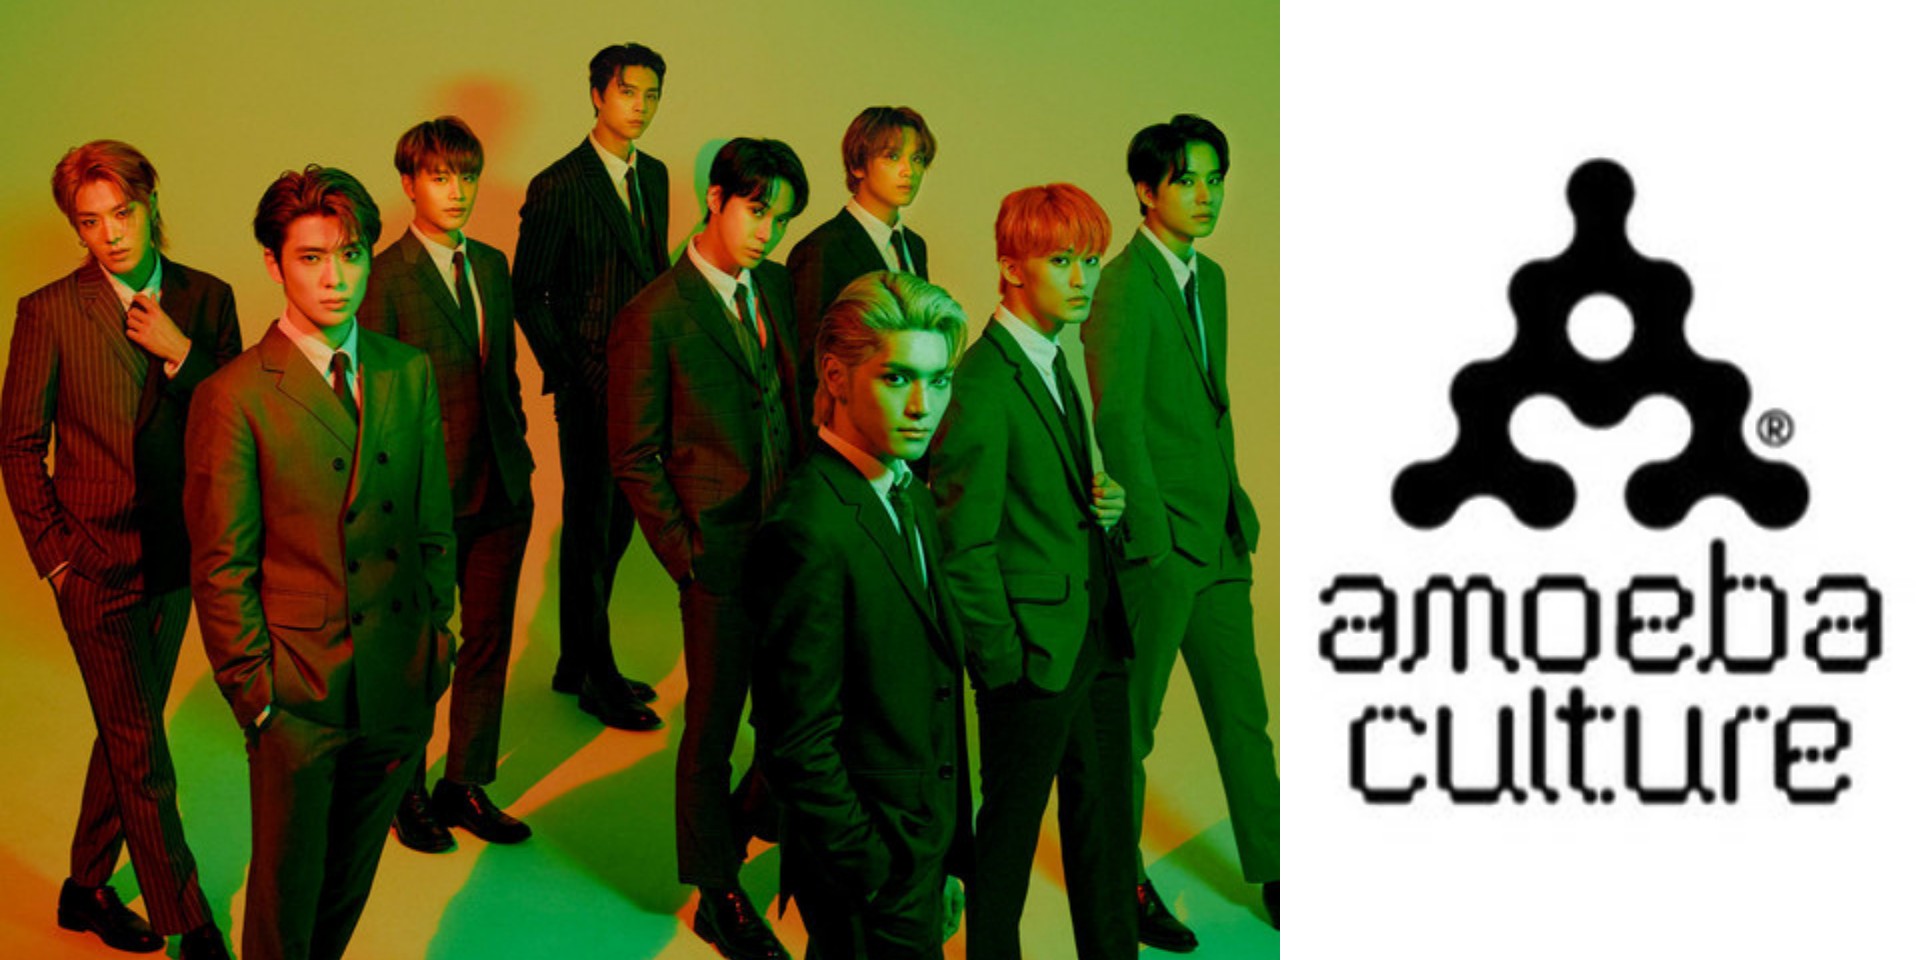 NCT 127 tease collaborative project with Amoeba Culture titled 'Save'